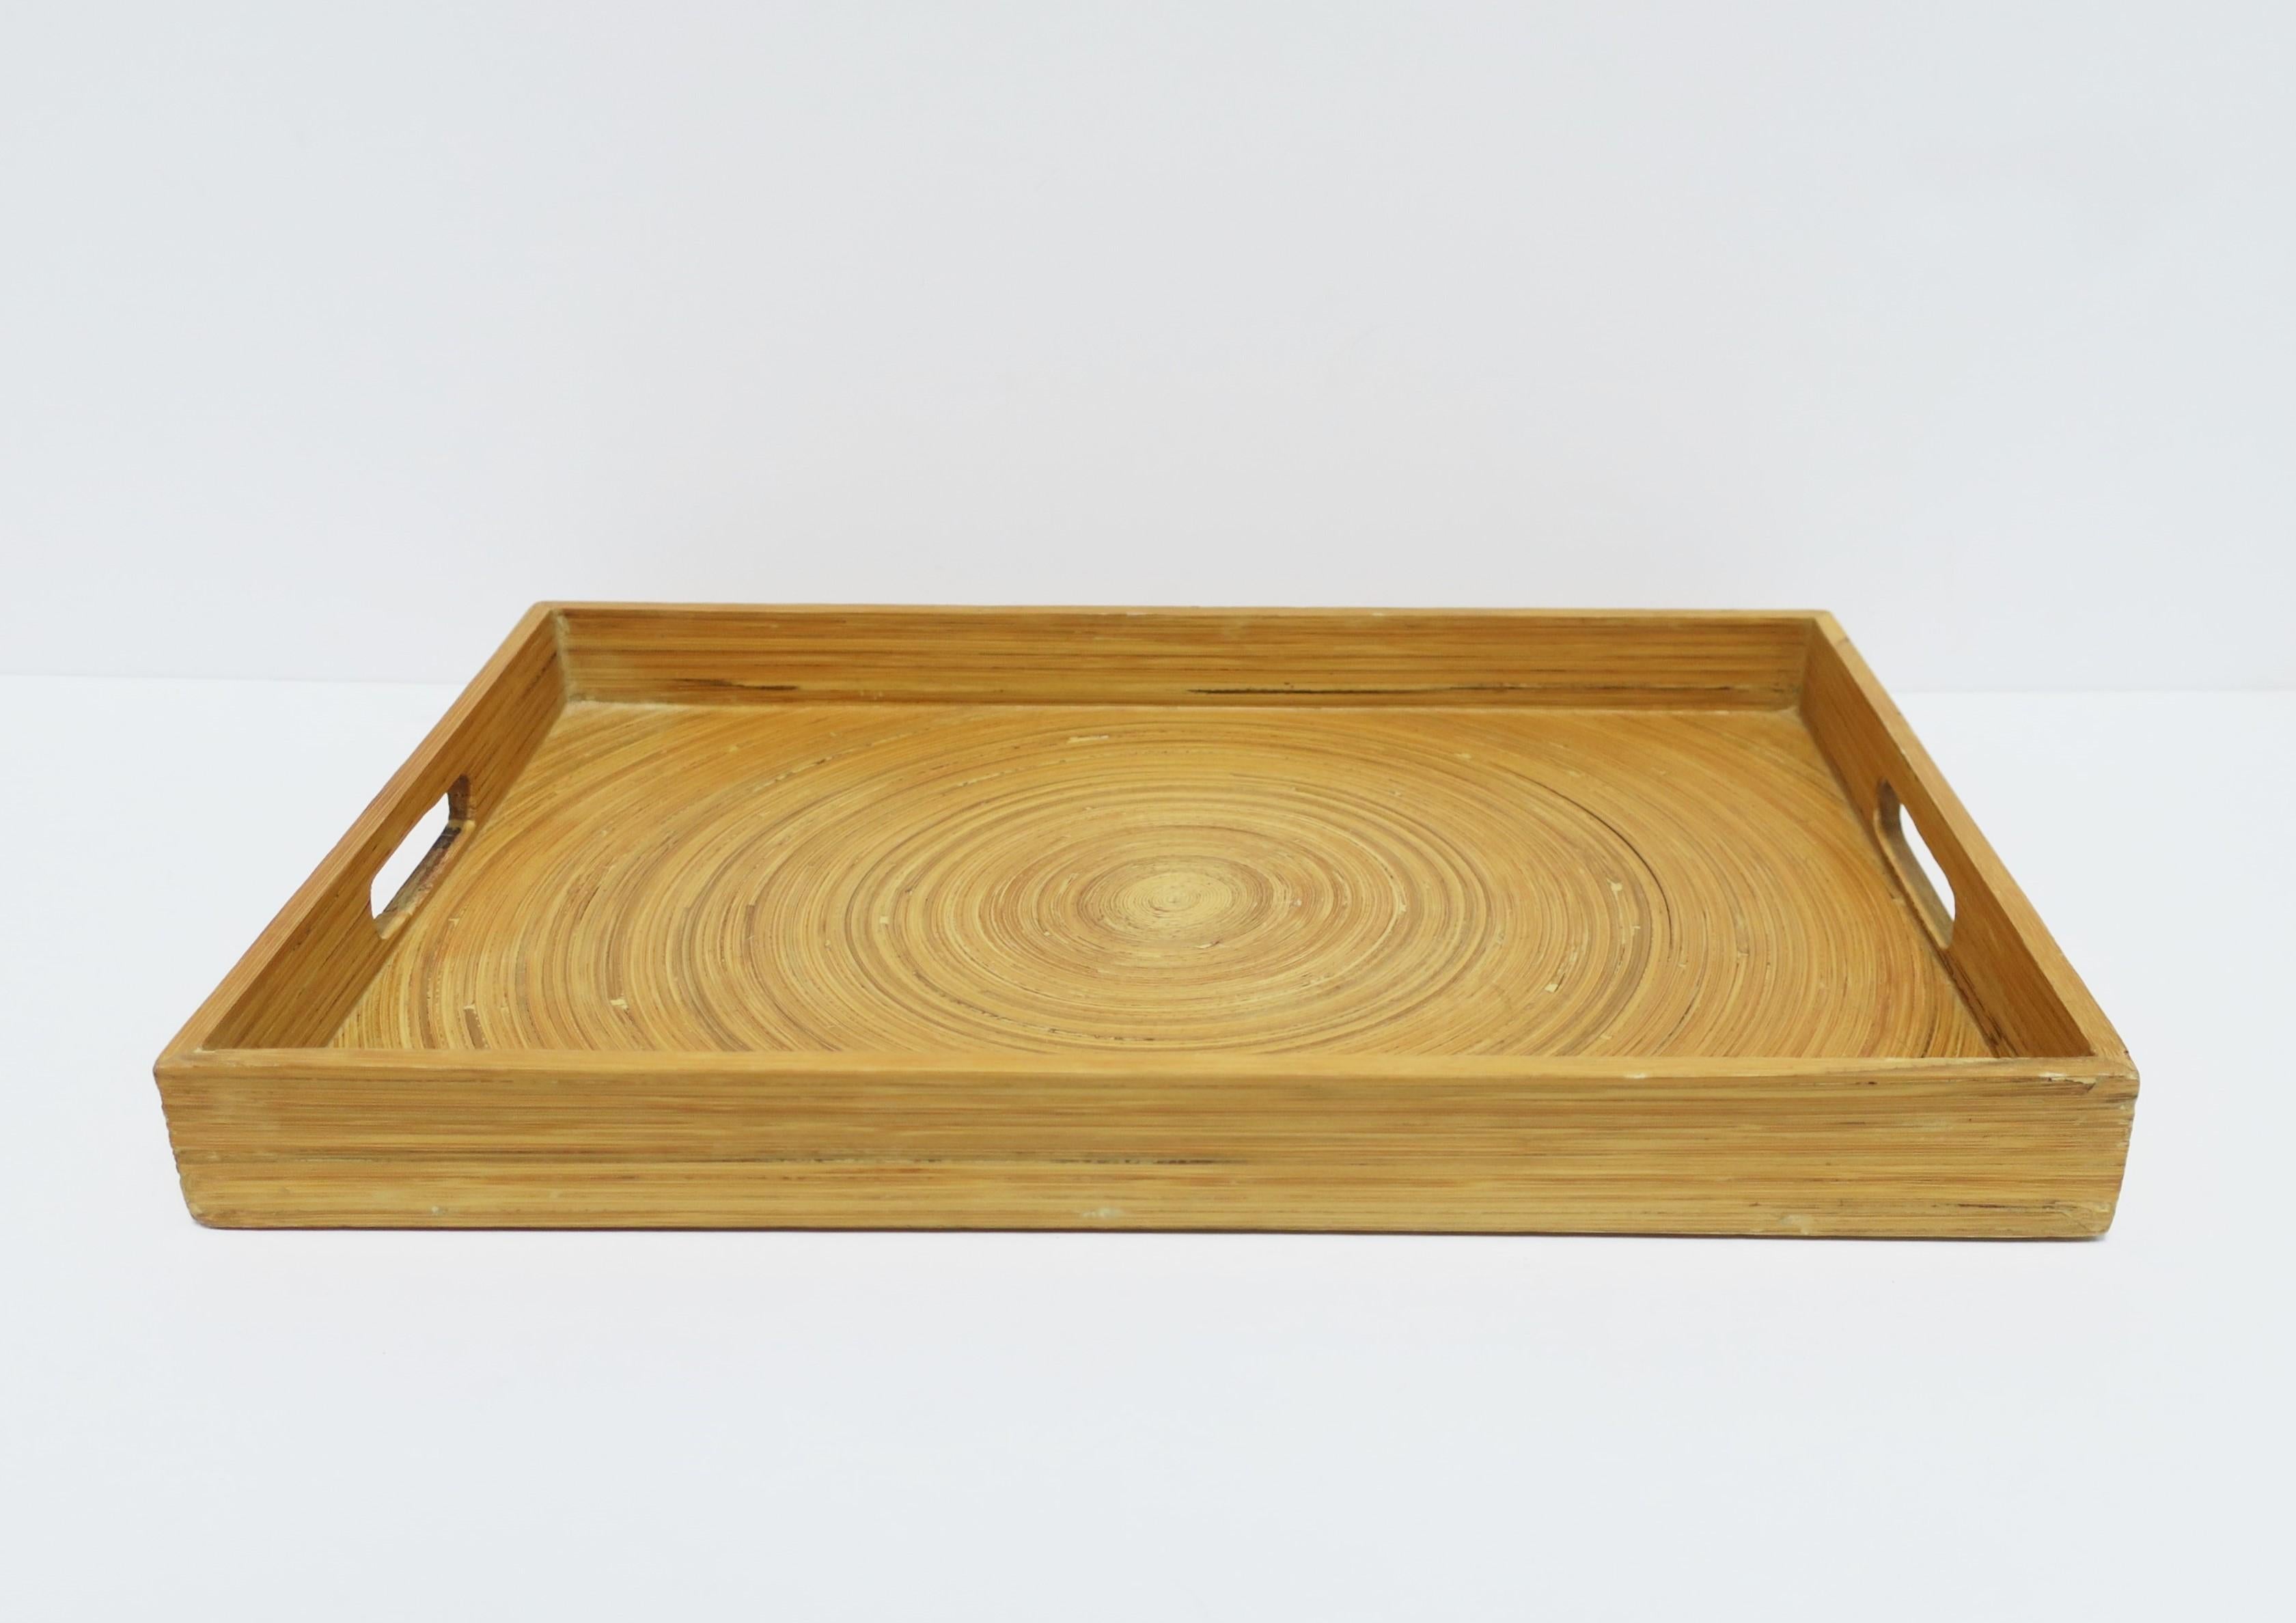 Wicker Serving or Storage Tray In Good Condition For Sale In New York, NY